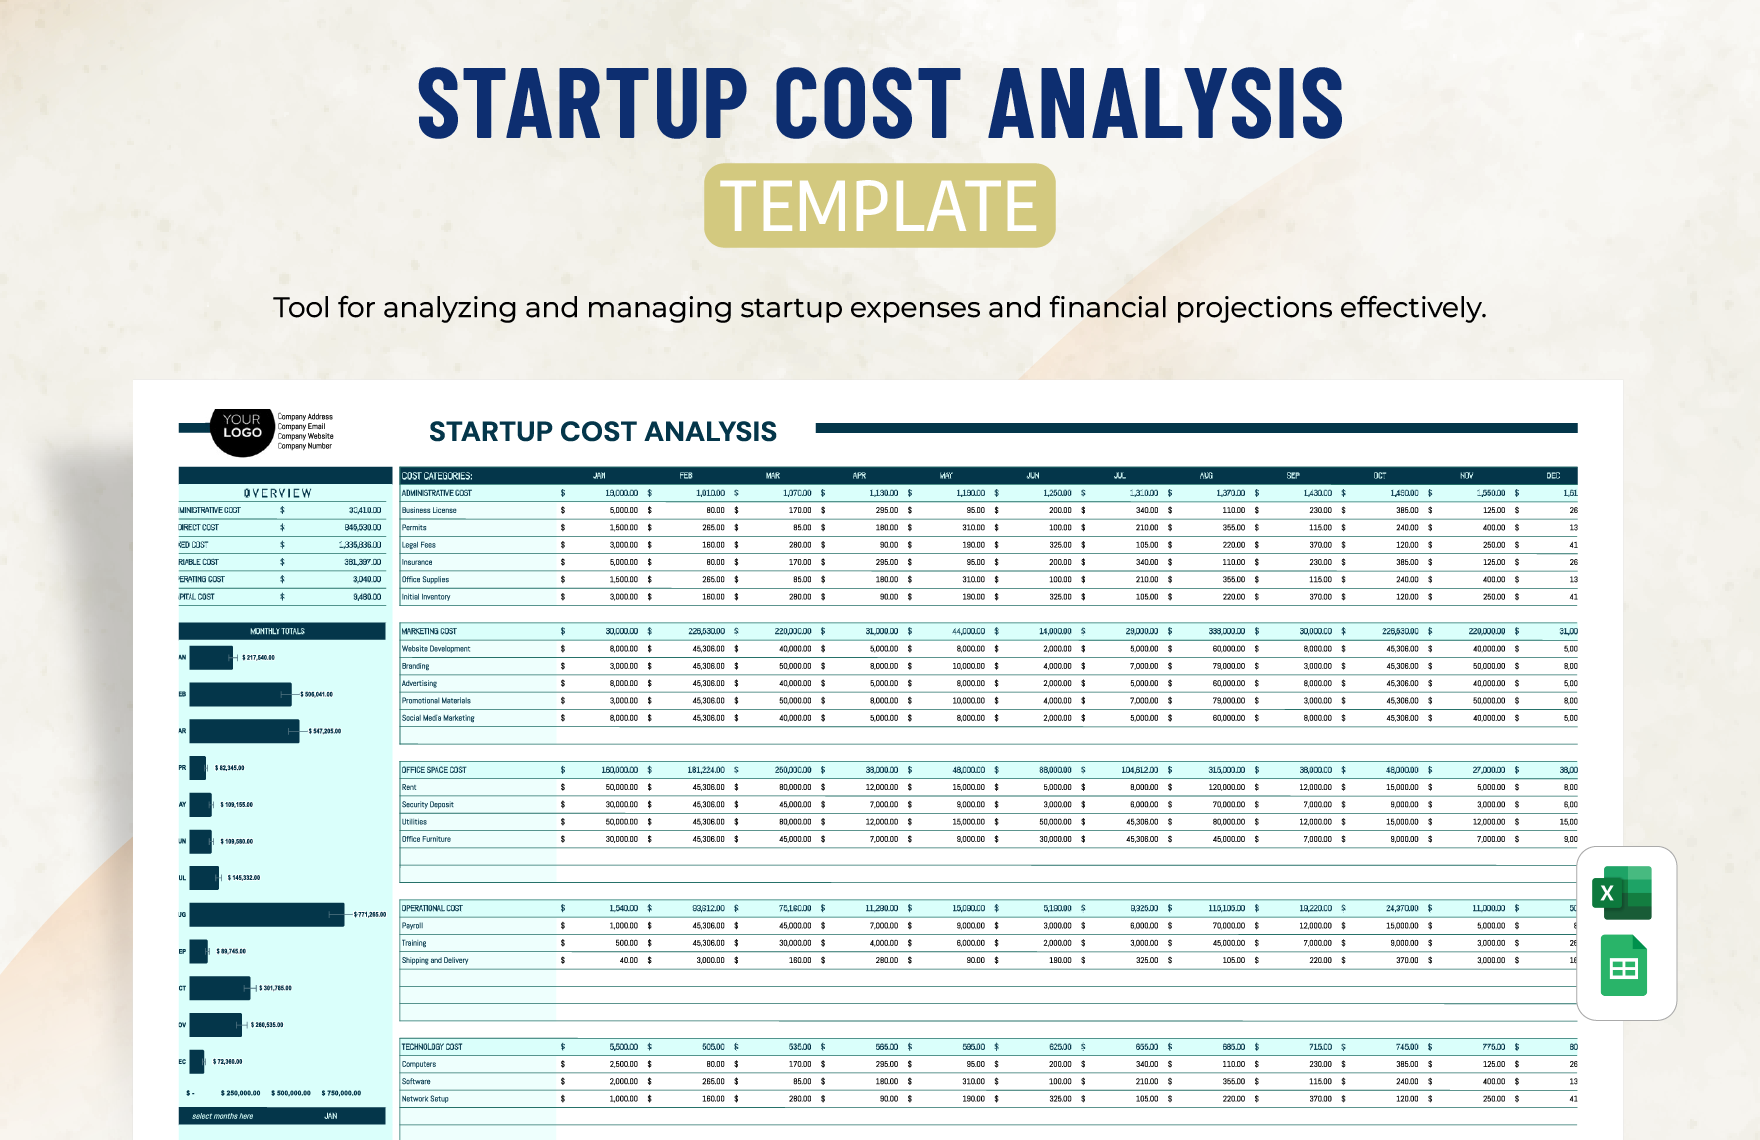 Startup Cost Analysis Template in Excel, Google Sheets